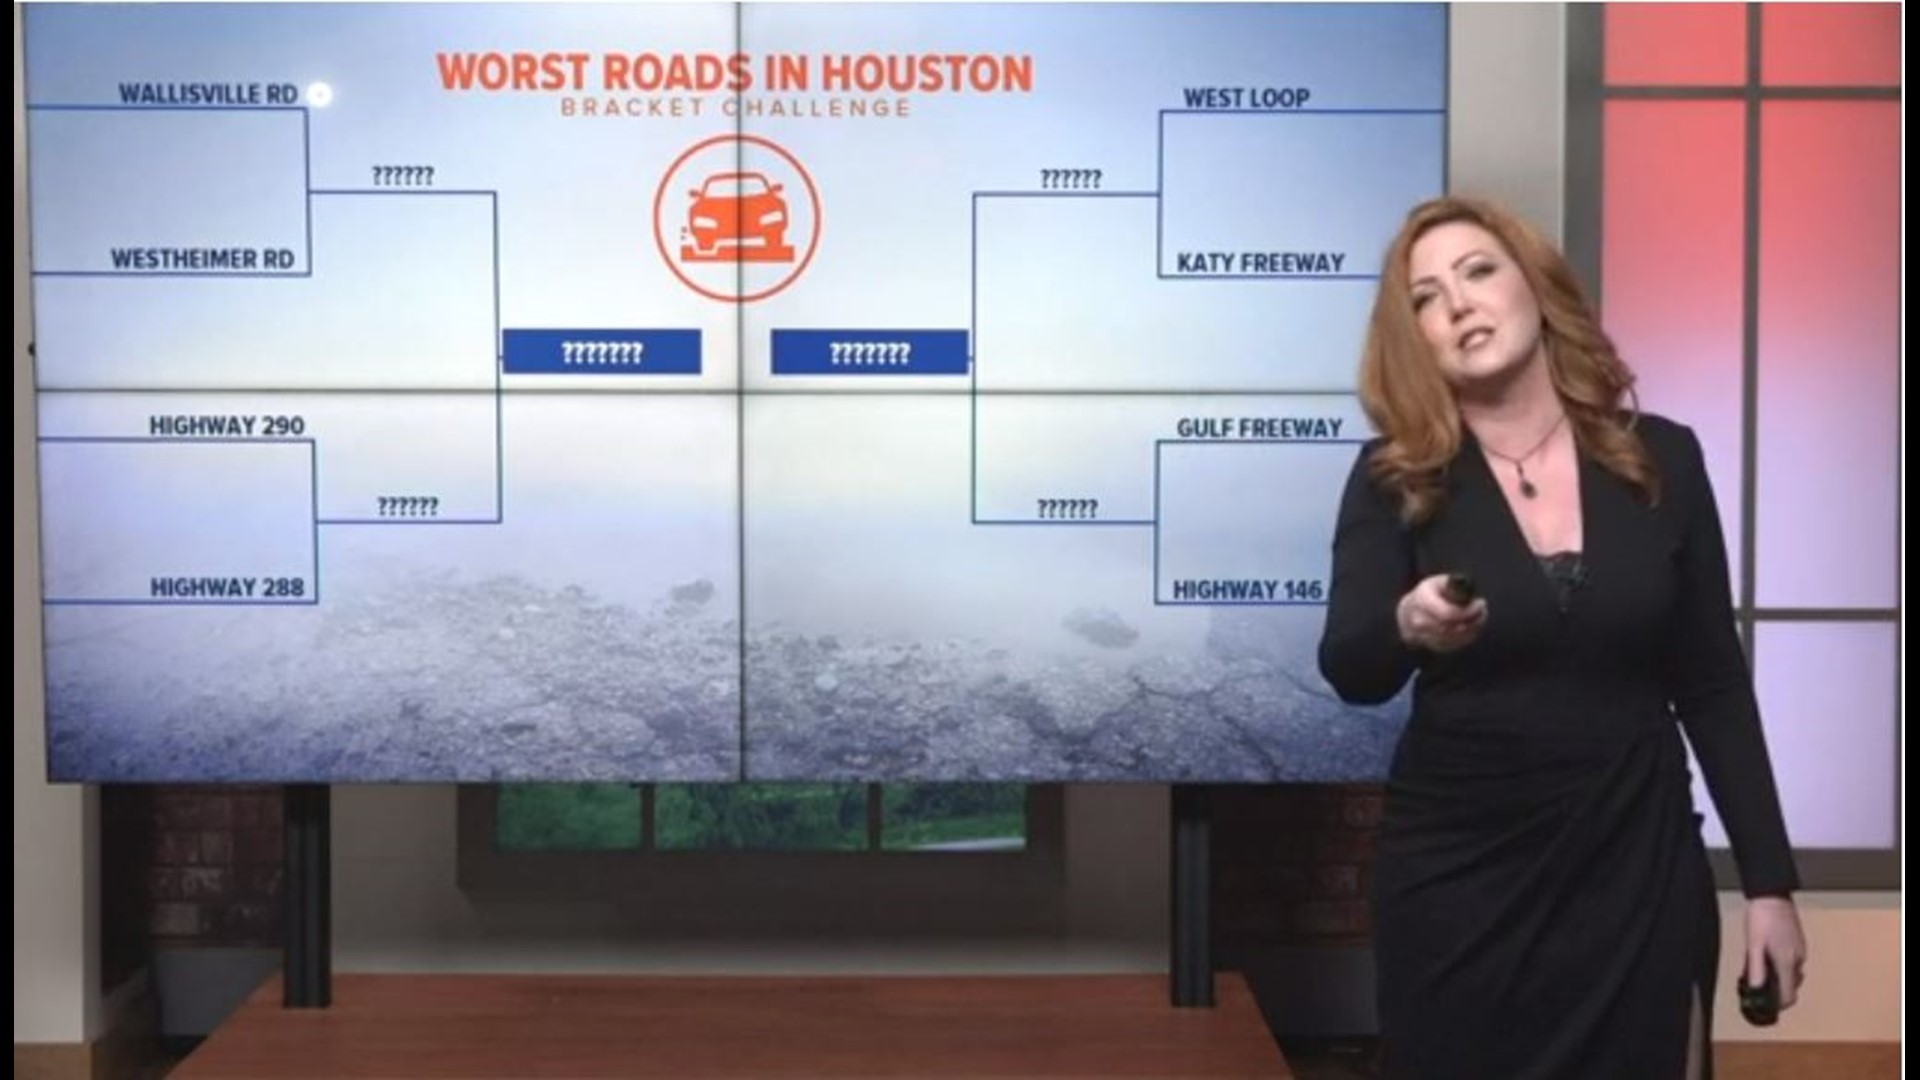 #HTownRush created its own March Madness bracket with the worst roads and freeways in the Houston area. Eight roads enter, one road takes the championship.